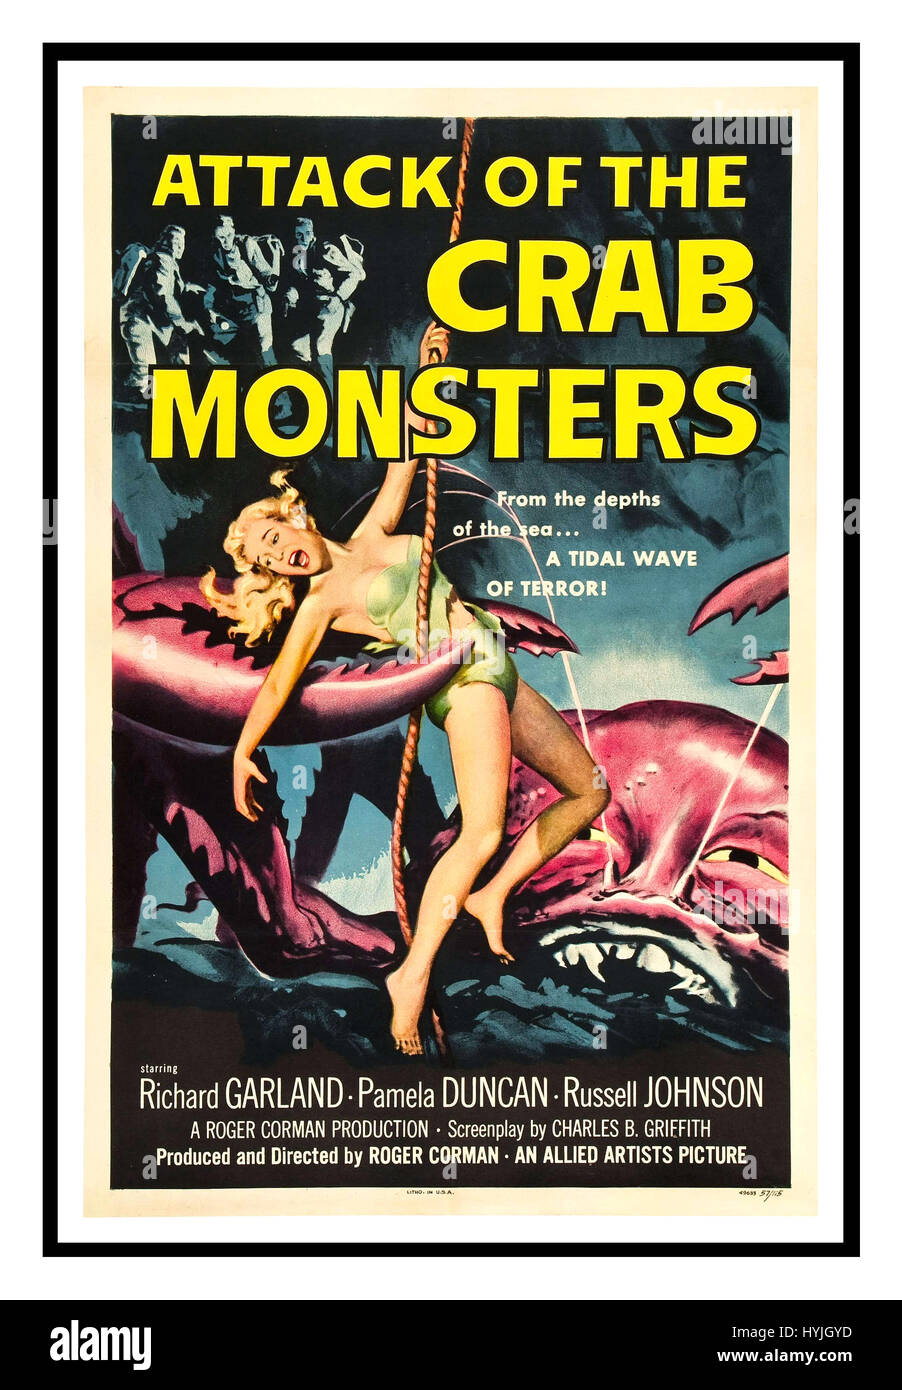 ATTACK OF THE CRAB MONSTERS Vintage film poster advertises the horror sci-fi movie of 1957 Attack of the Crab Monsters produced and directed by Roger Corman,.starring Richard Garland, Pamela Duncan and Russell Johnson Stock Photo